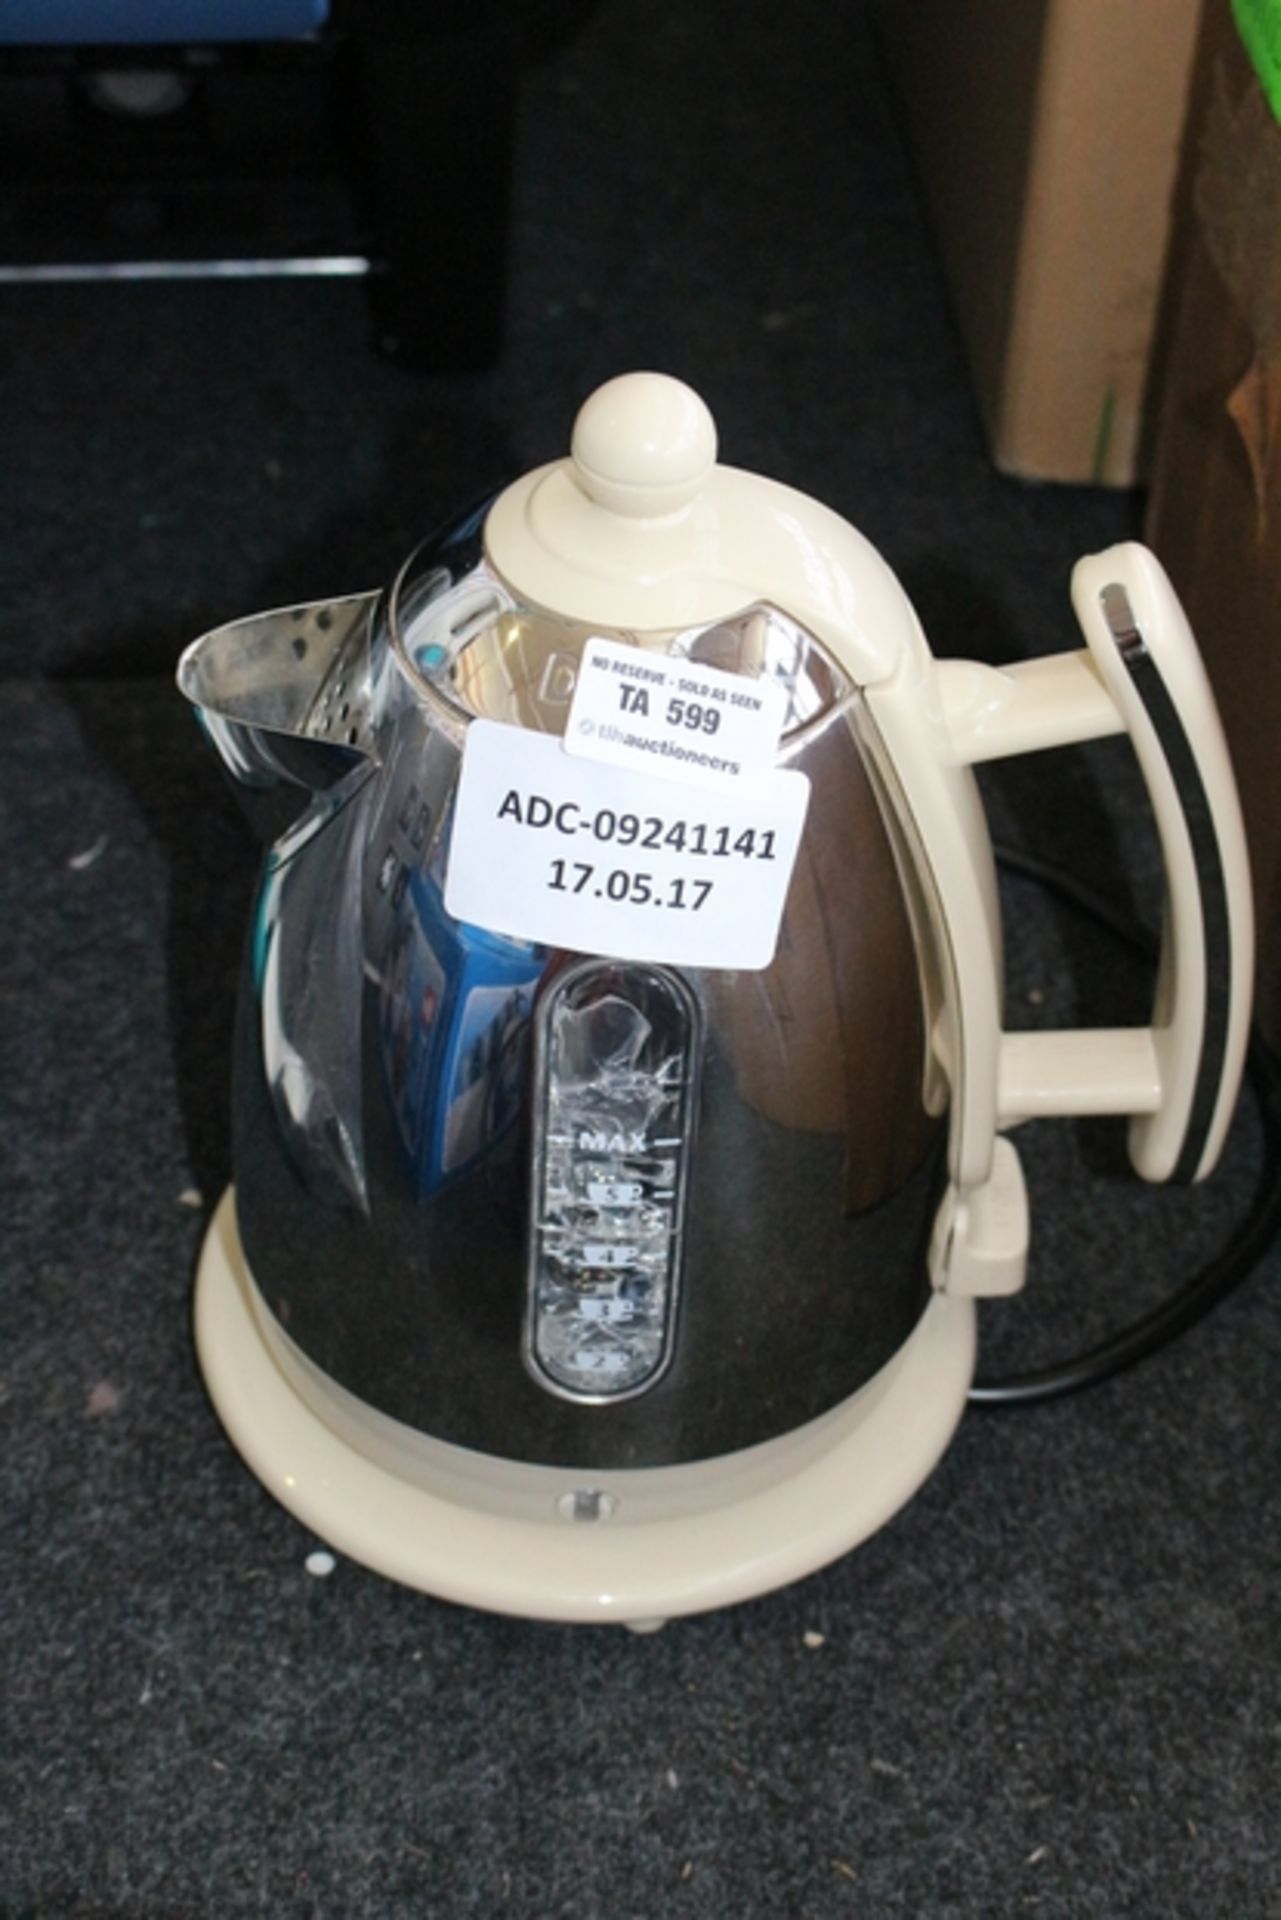 1X DUALIT JUG KETTLE RRP £60 (ADC-09241141) (17/05/17)